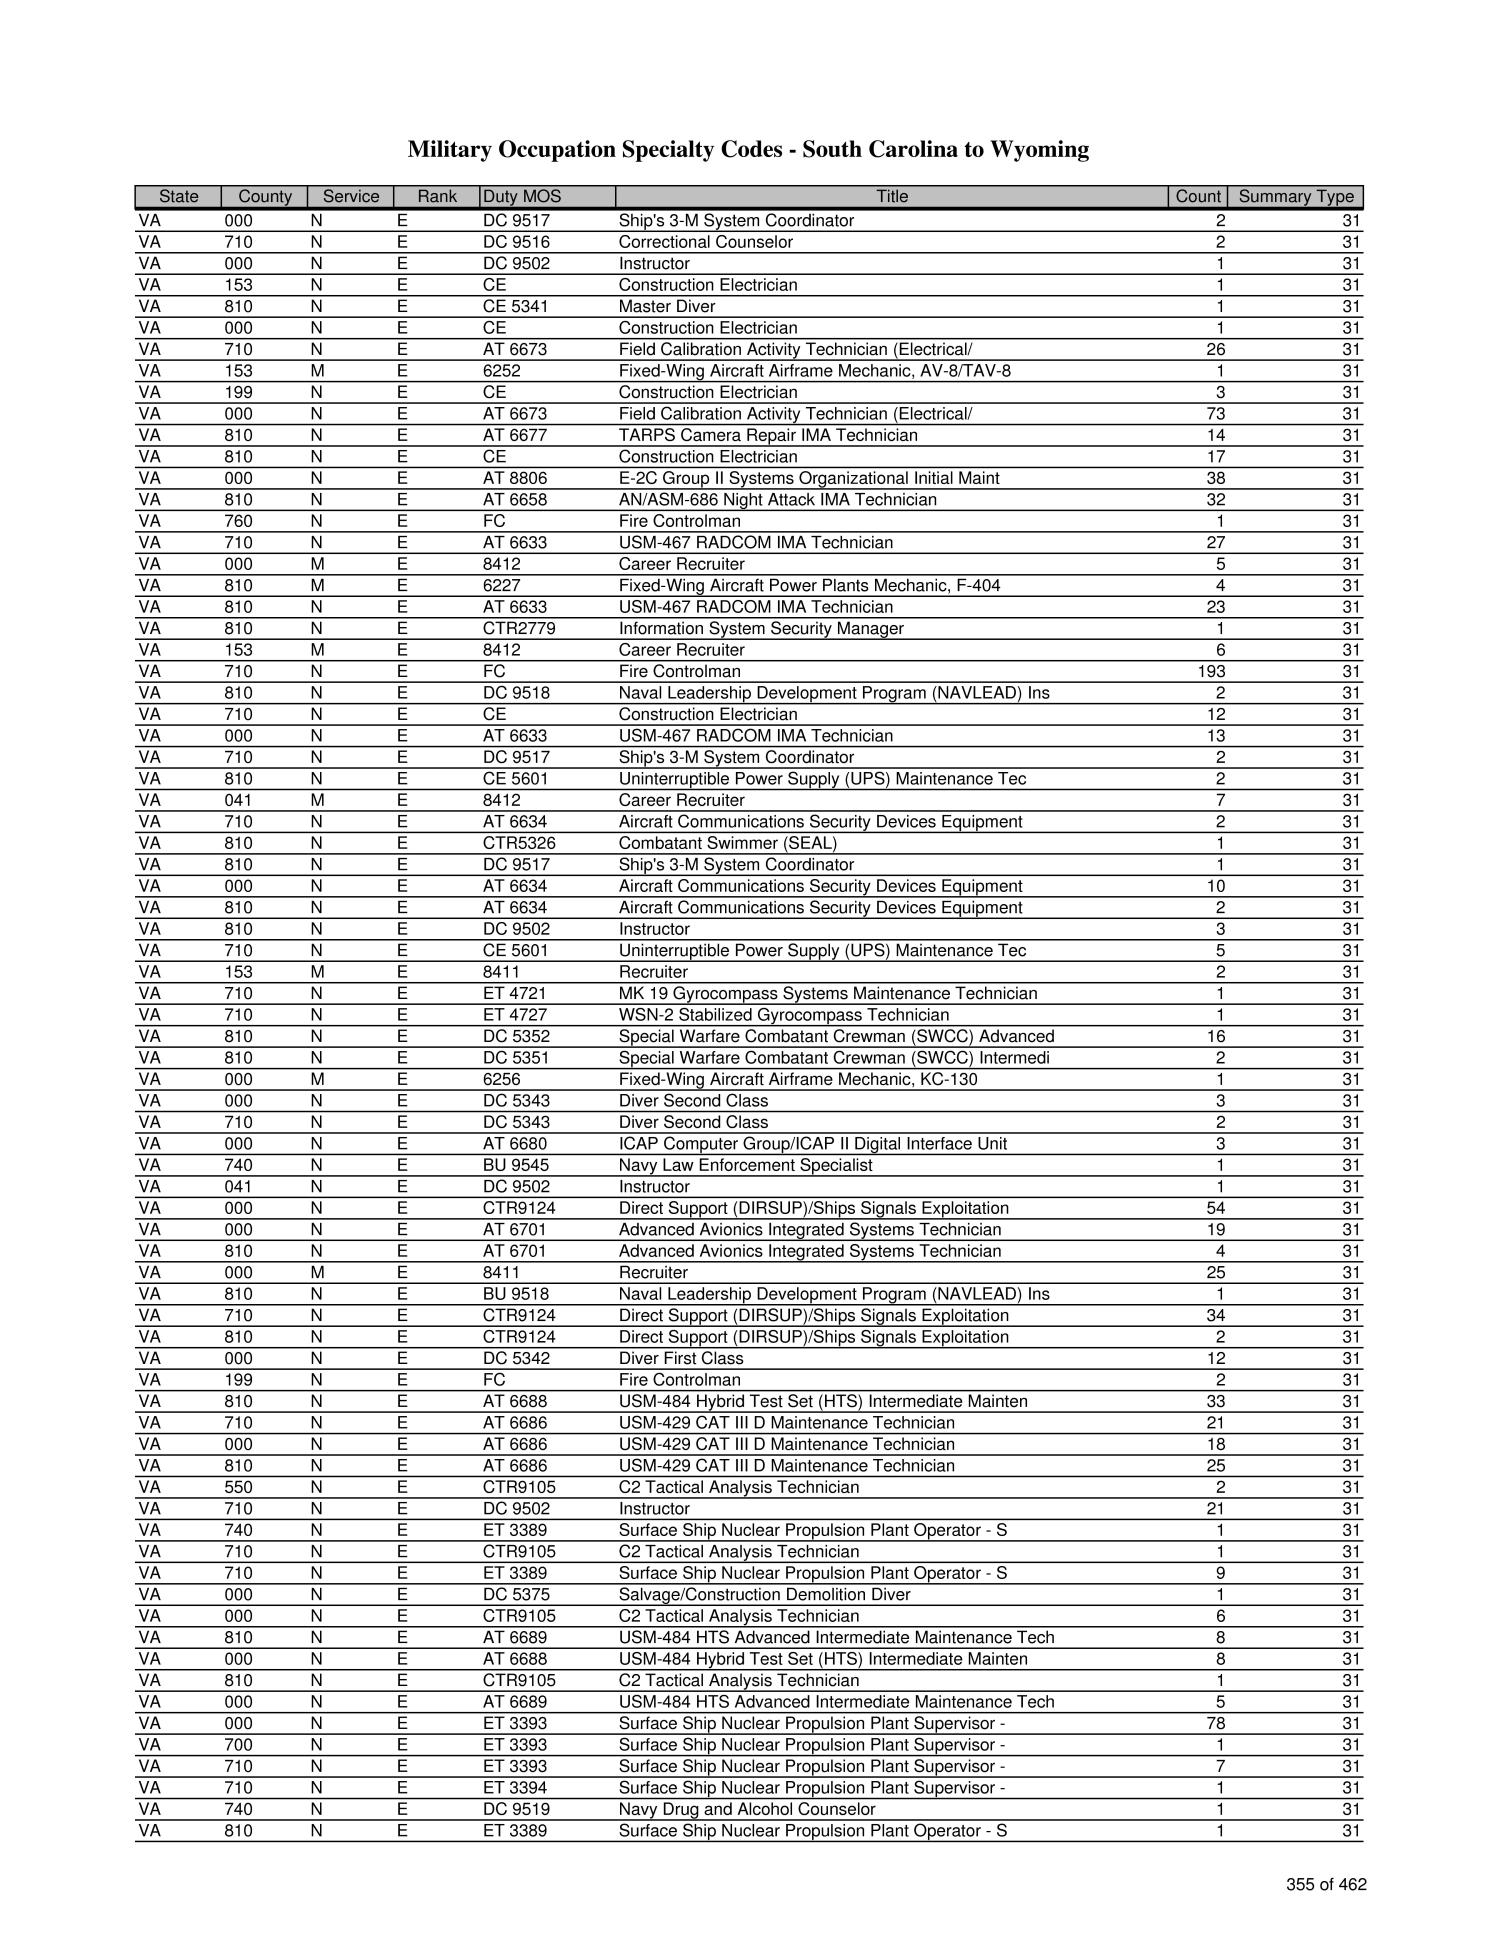 List of Military Occupation Specialty codes (MOS) by State and County